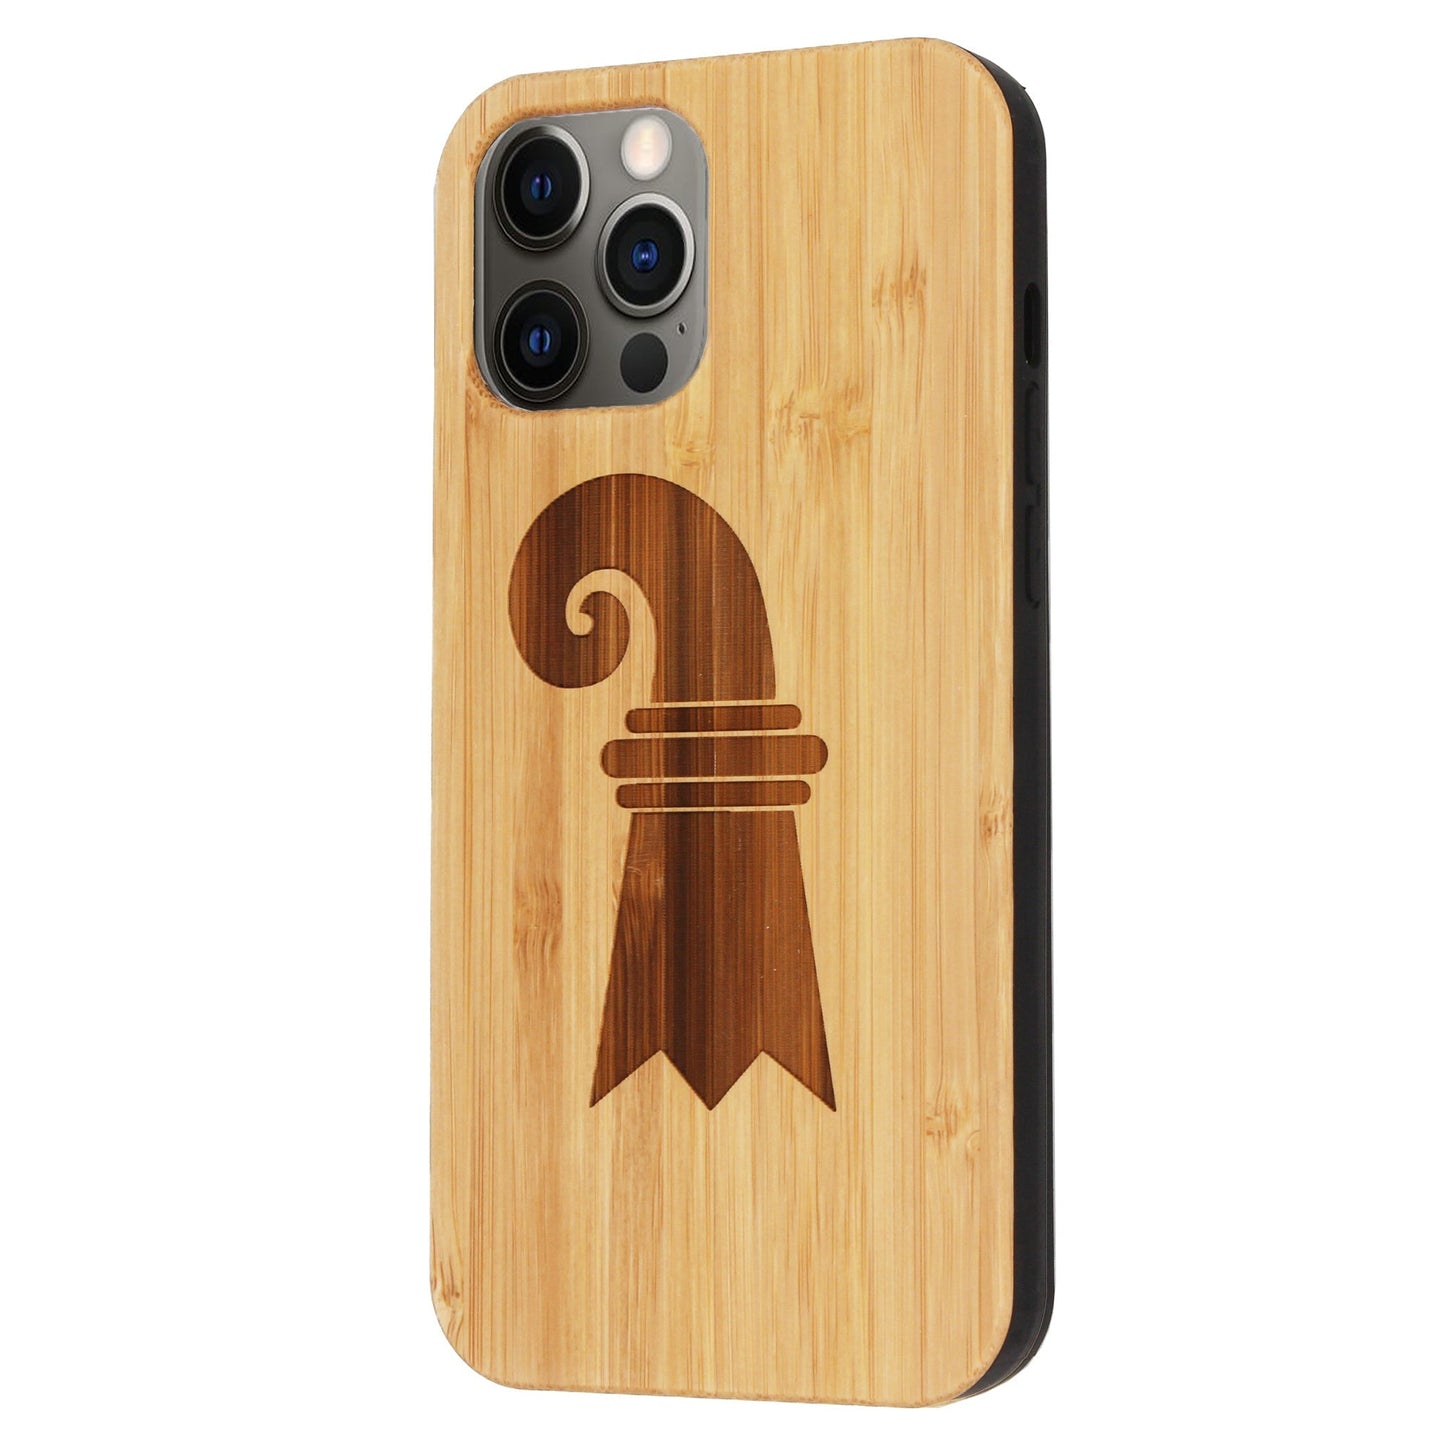 Baslerstab Eden case made of bamboo for iPhone 12 Pro Max 